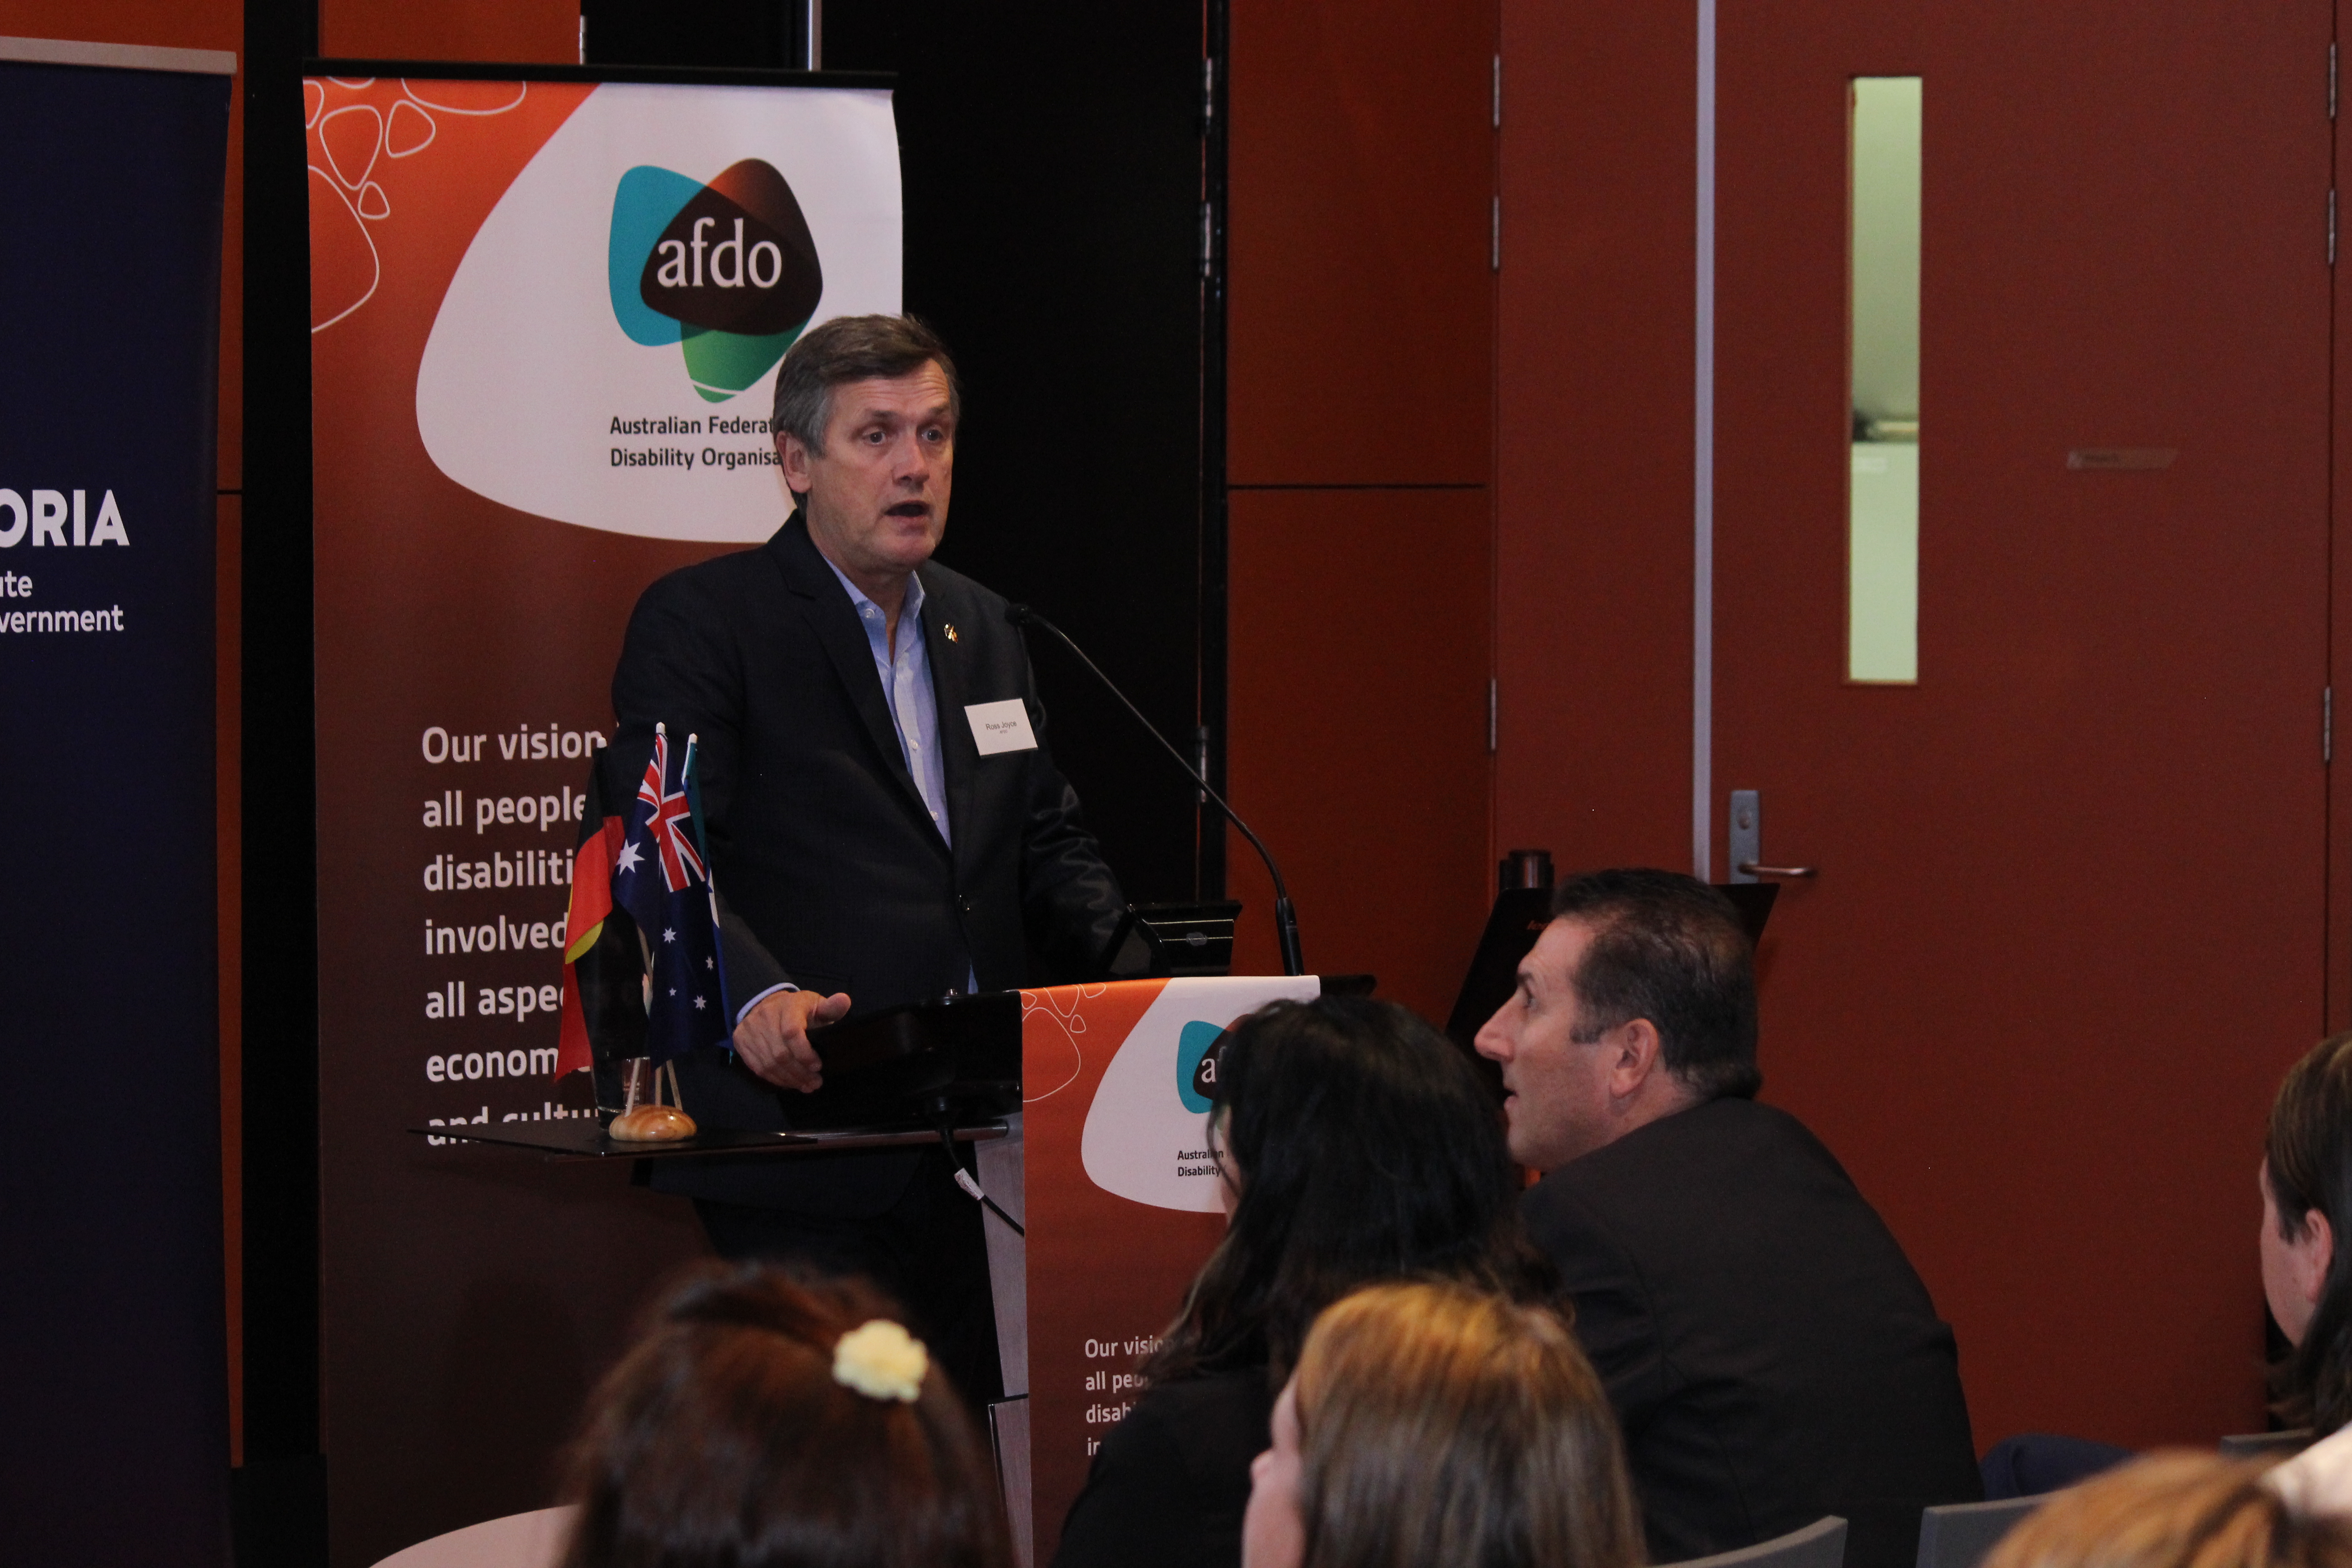 Ross Joyce, AFDO CEO speaking at event.